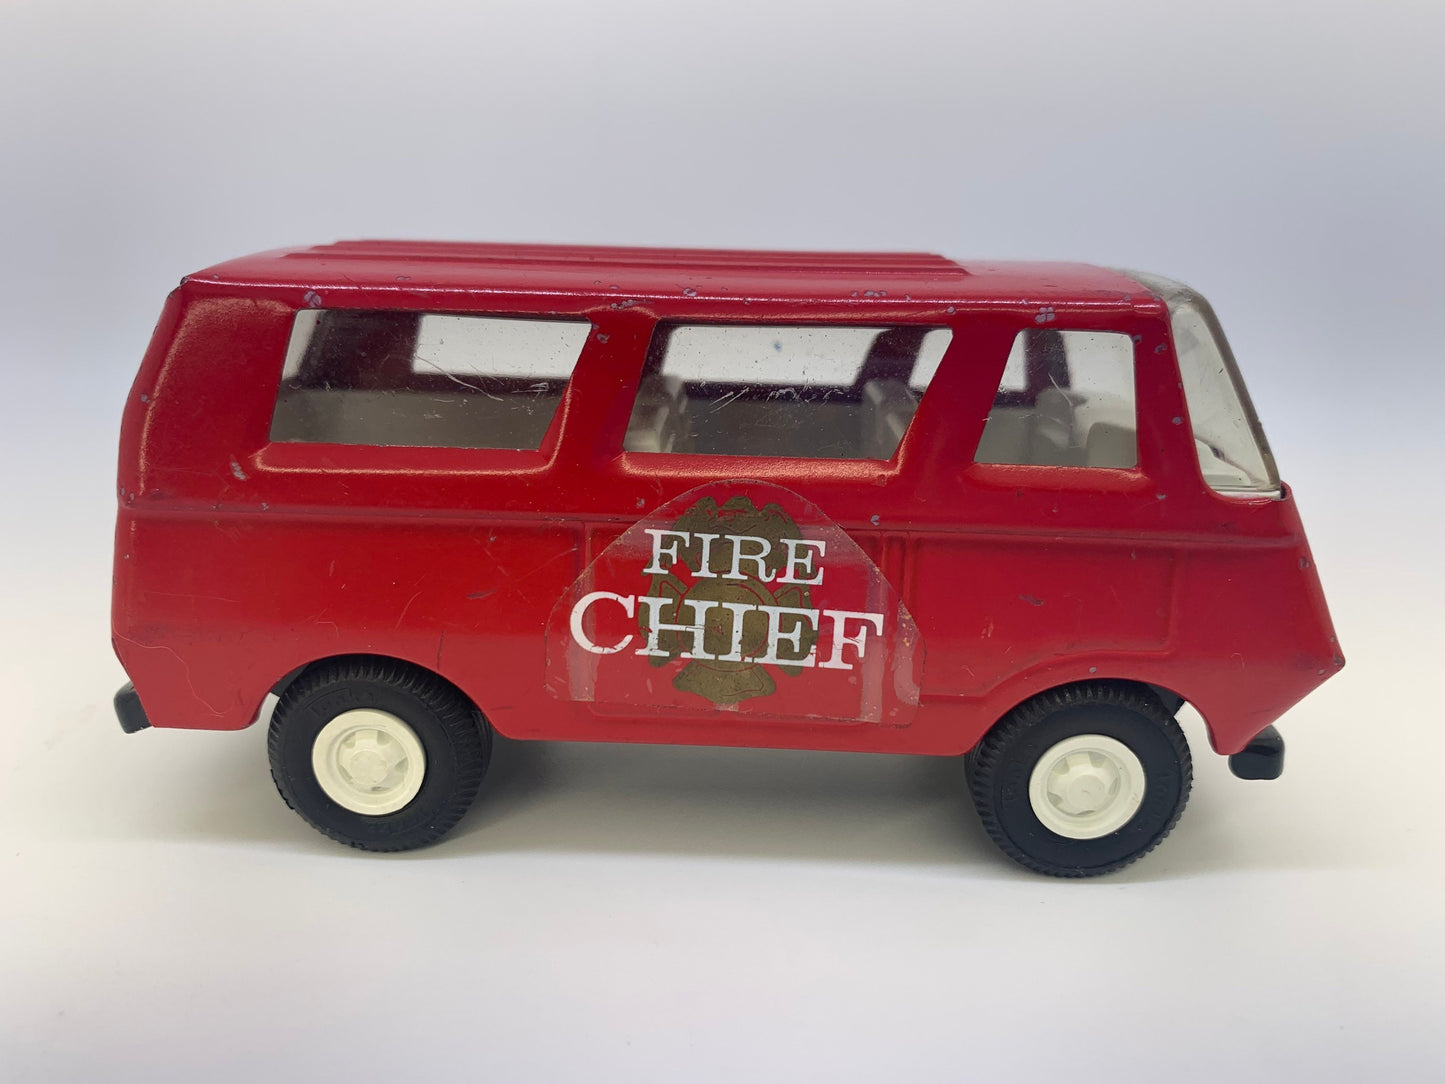 Tonka Fire Chief Van Red Collectable Miniature Scale Model Toy Car Perfect Birthday Gift